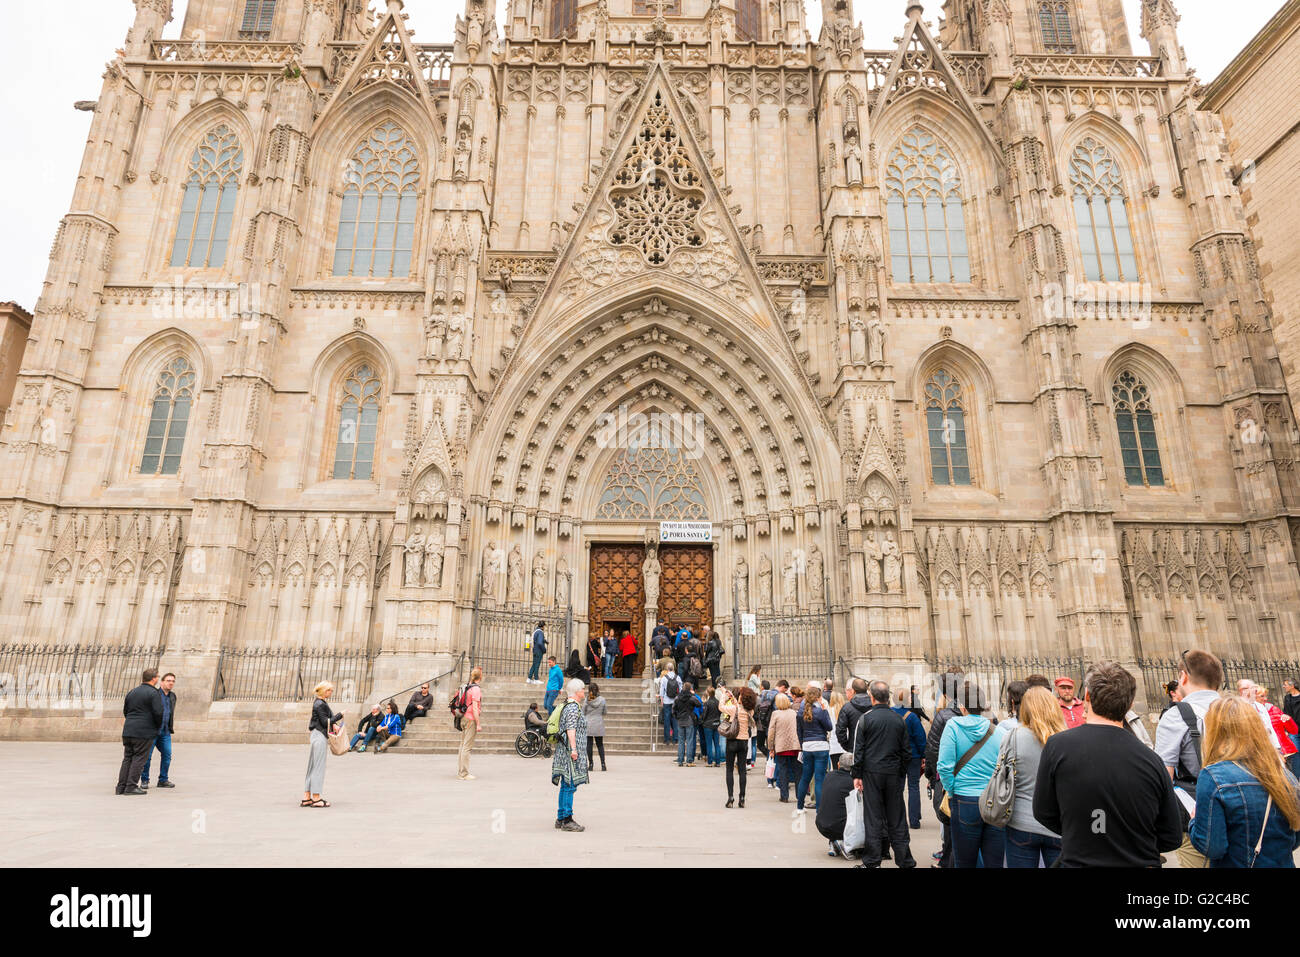 Spain Catalonia Barcelona Barri Gotic Gothic Quarter 14th century Cathedral with 28 chapels tourists queue line up to get in Stock Photo